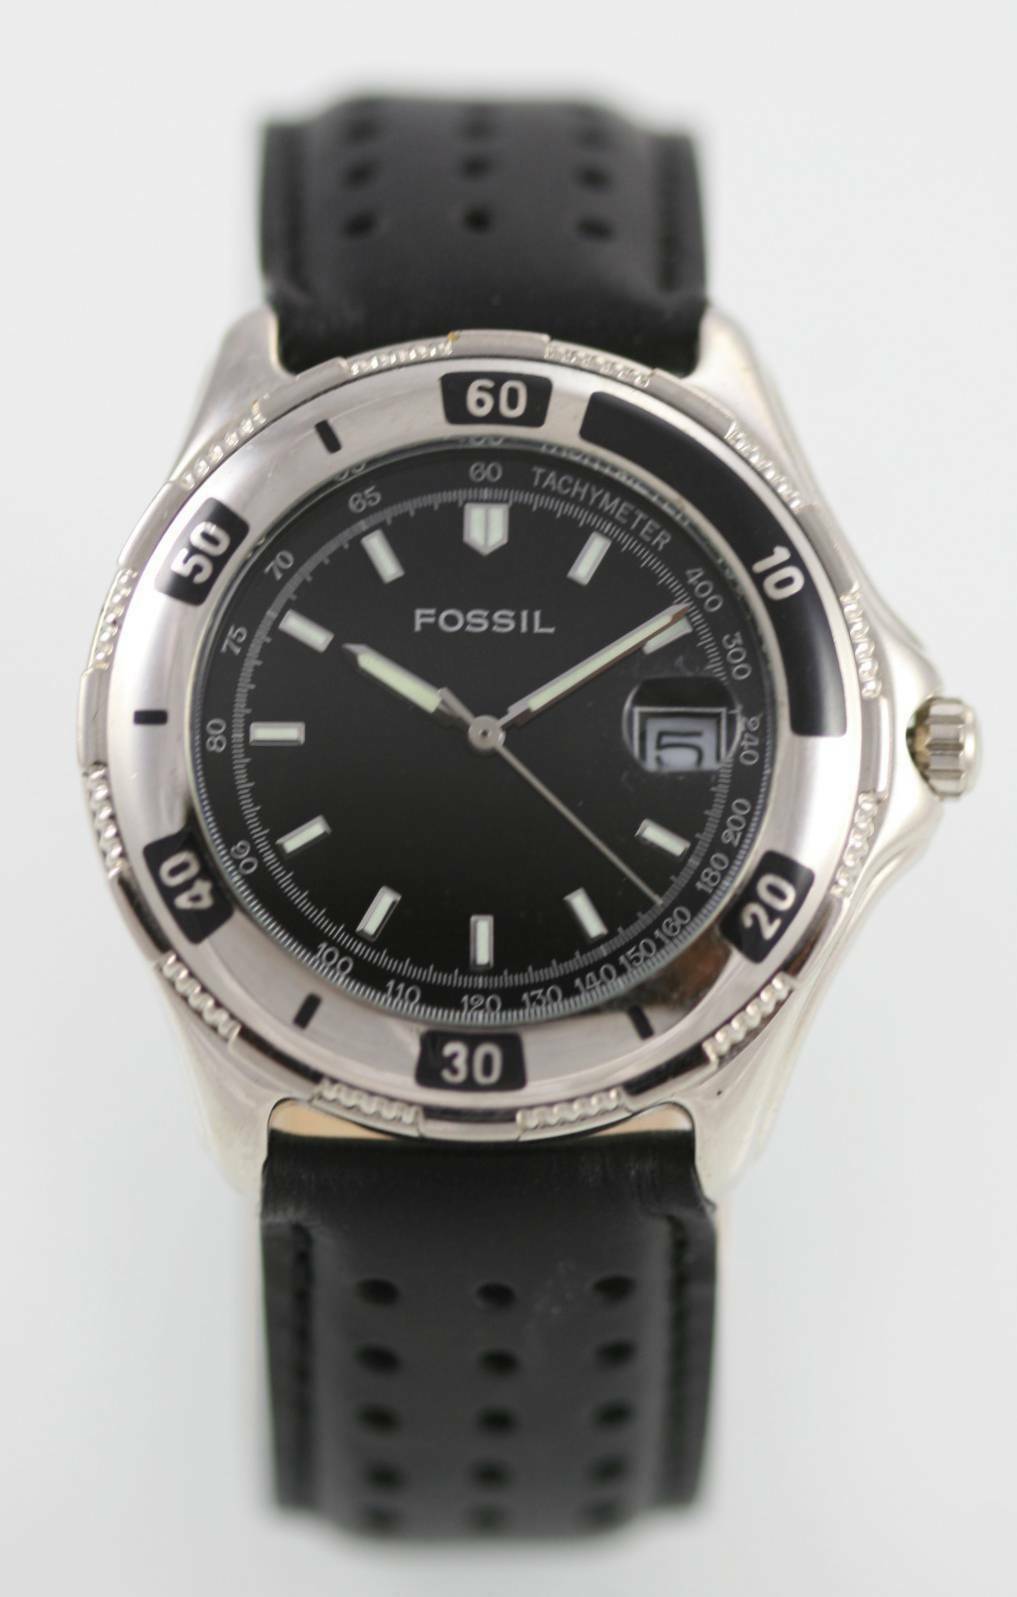 Fossil Watch Mens Stainless Silver Date Black Leather 30m Water